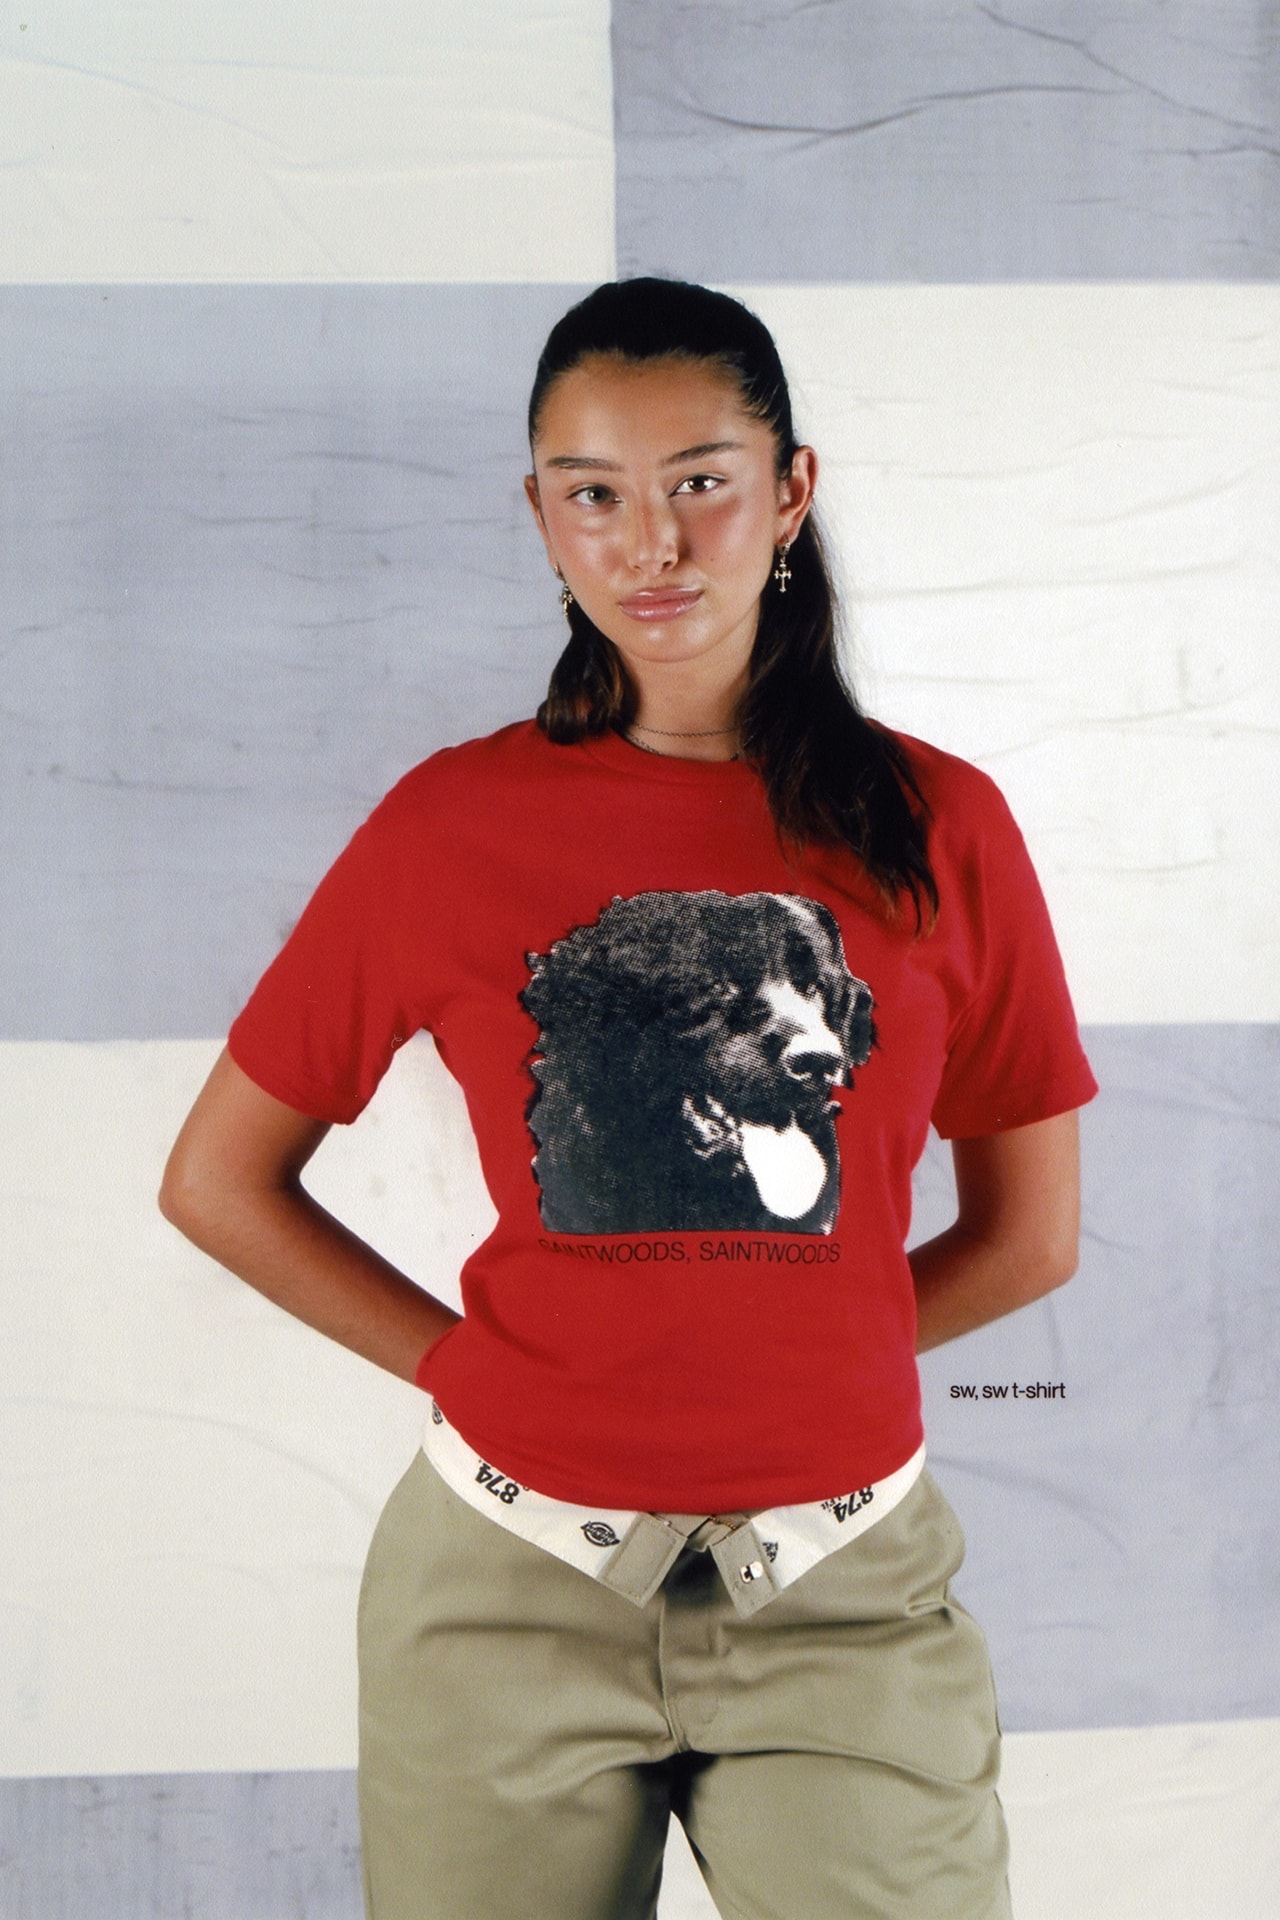 Saintwoods SW.013 SW013 Collection Lookbook Pop-Up Shop Montreal Canada Streetwear Brand T-shirt Dog Red